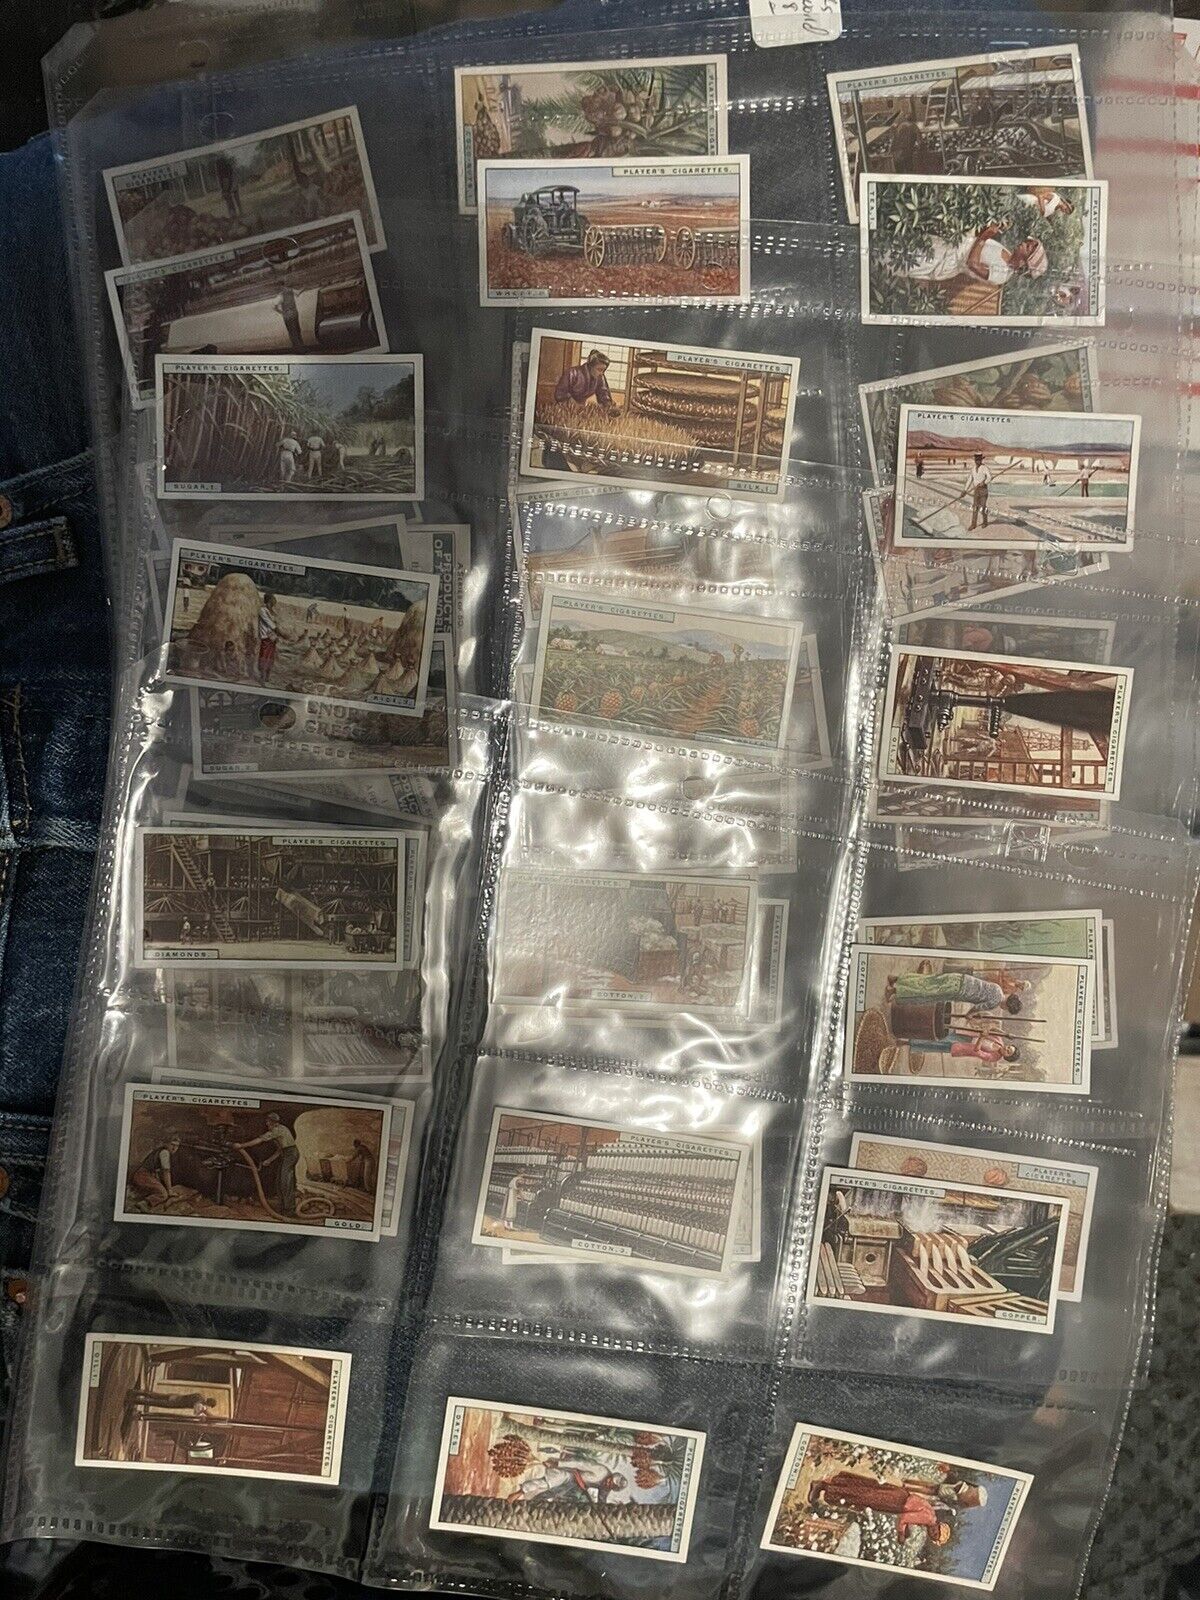 47 Of 50 Products Of The World John Player & Sons Tobacco Cards (From 1928)